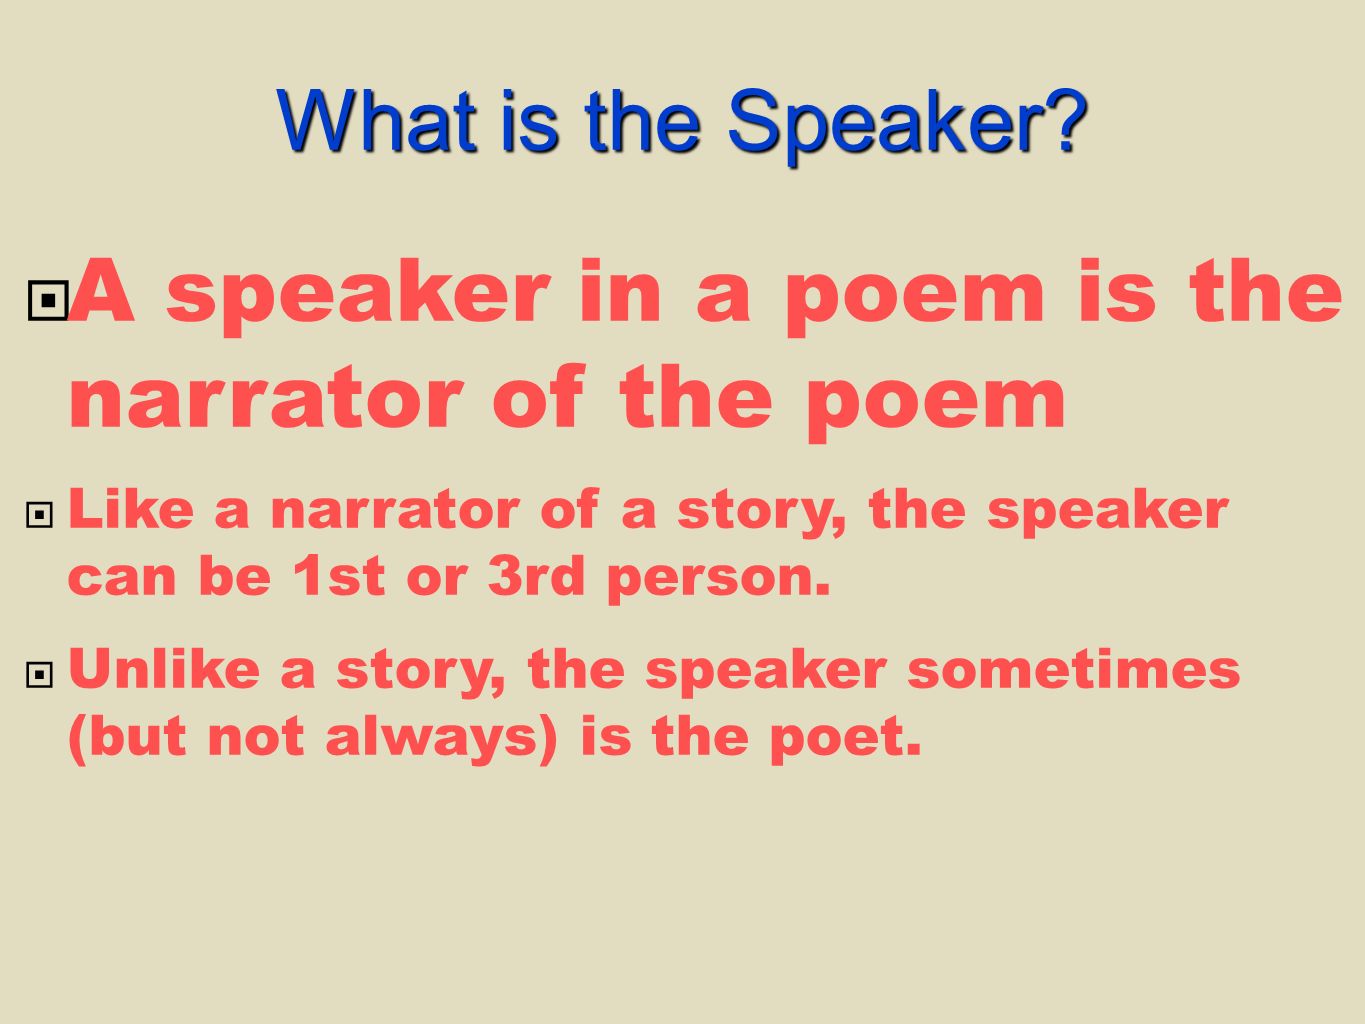  A speaker in a poem is the narrator of the poem  Like a narrator of a story, the speaker can be 1st or 3rd person.